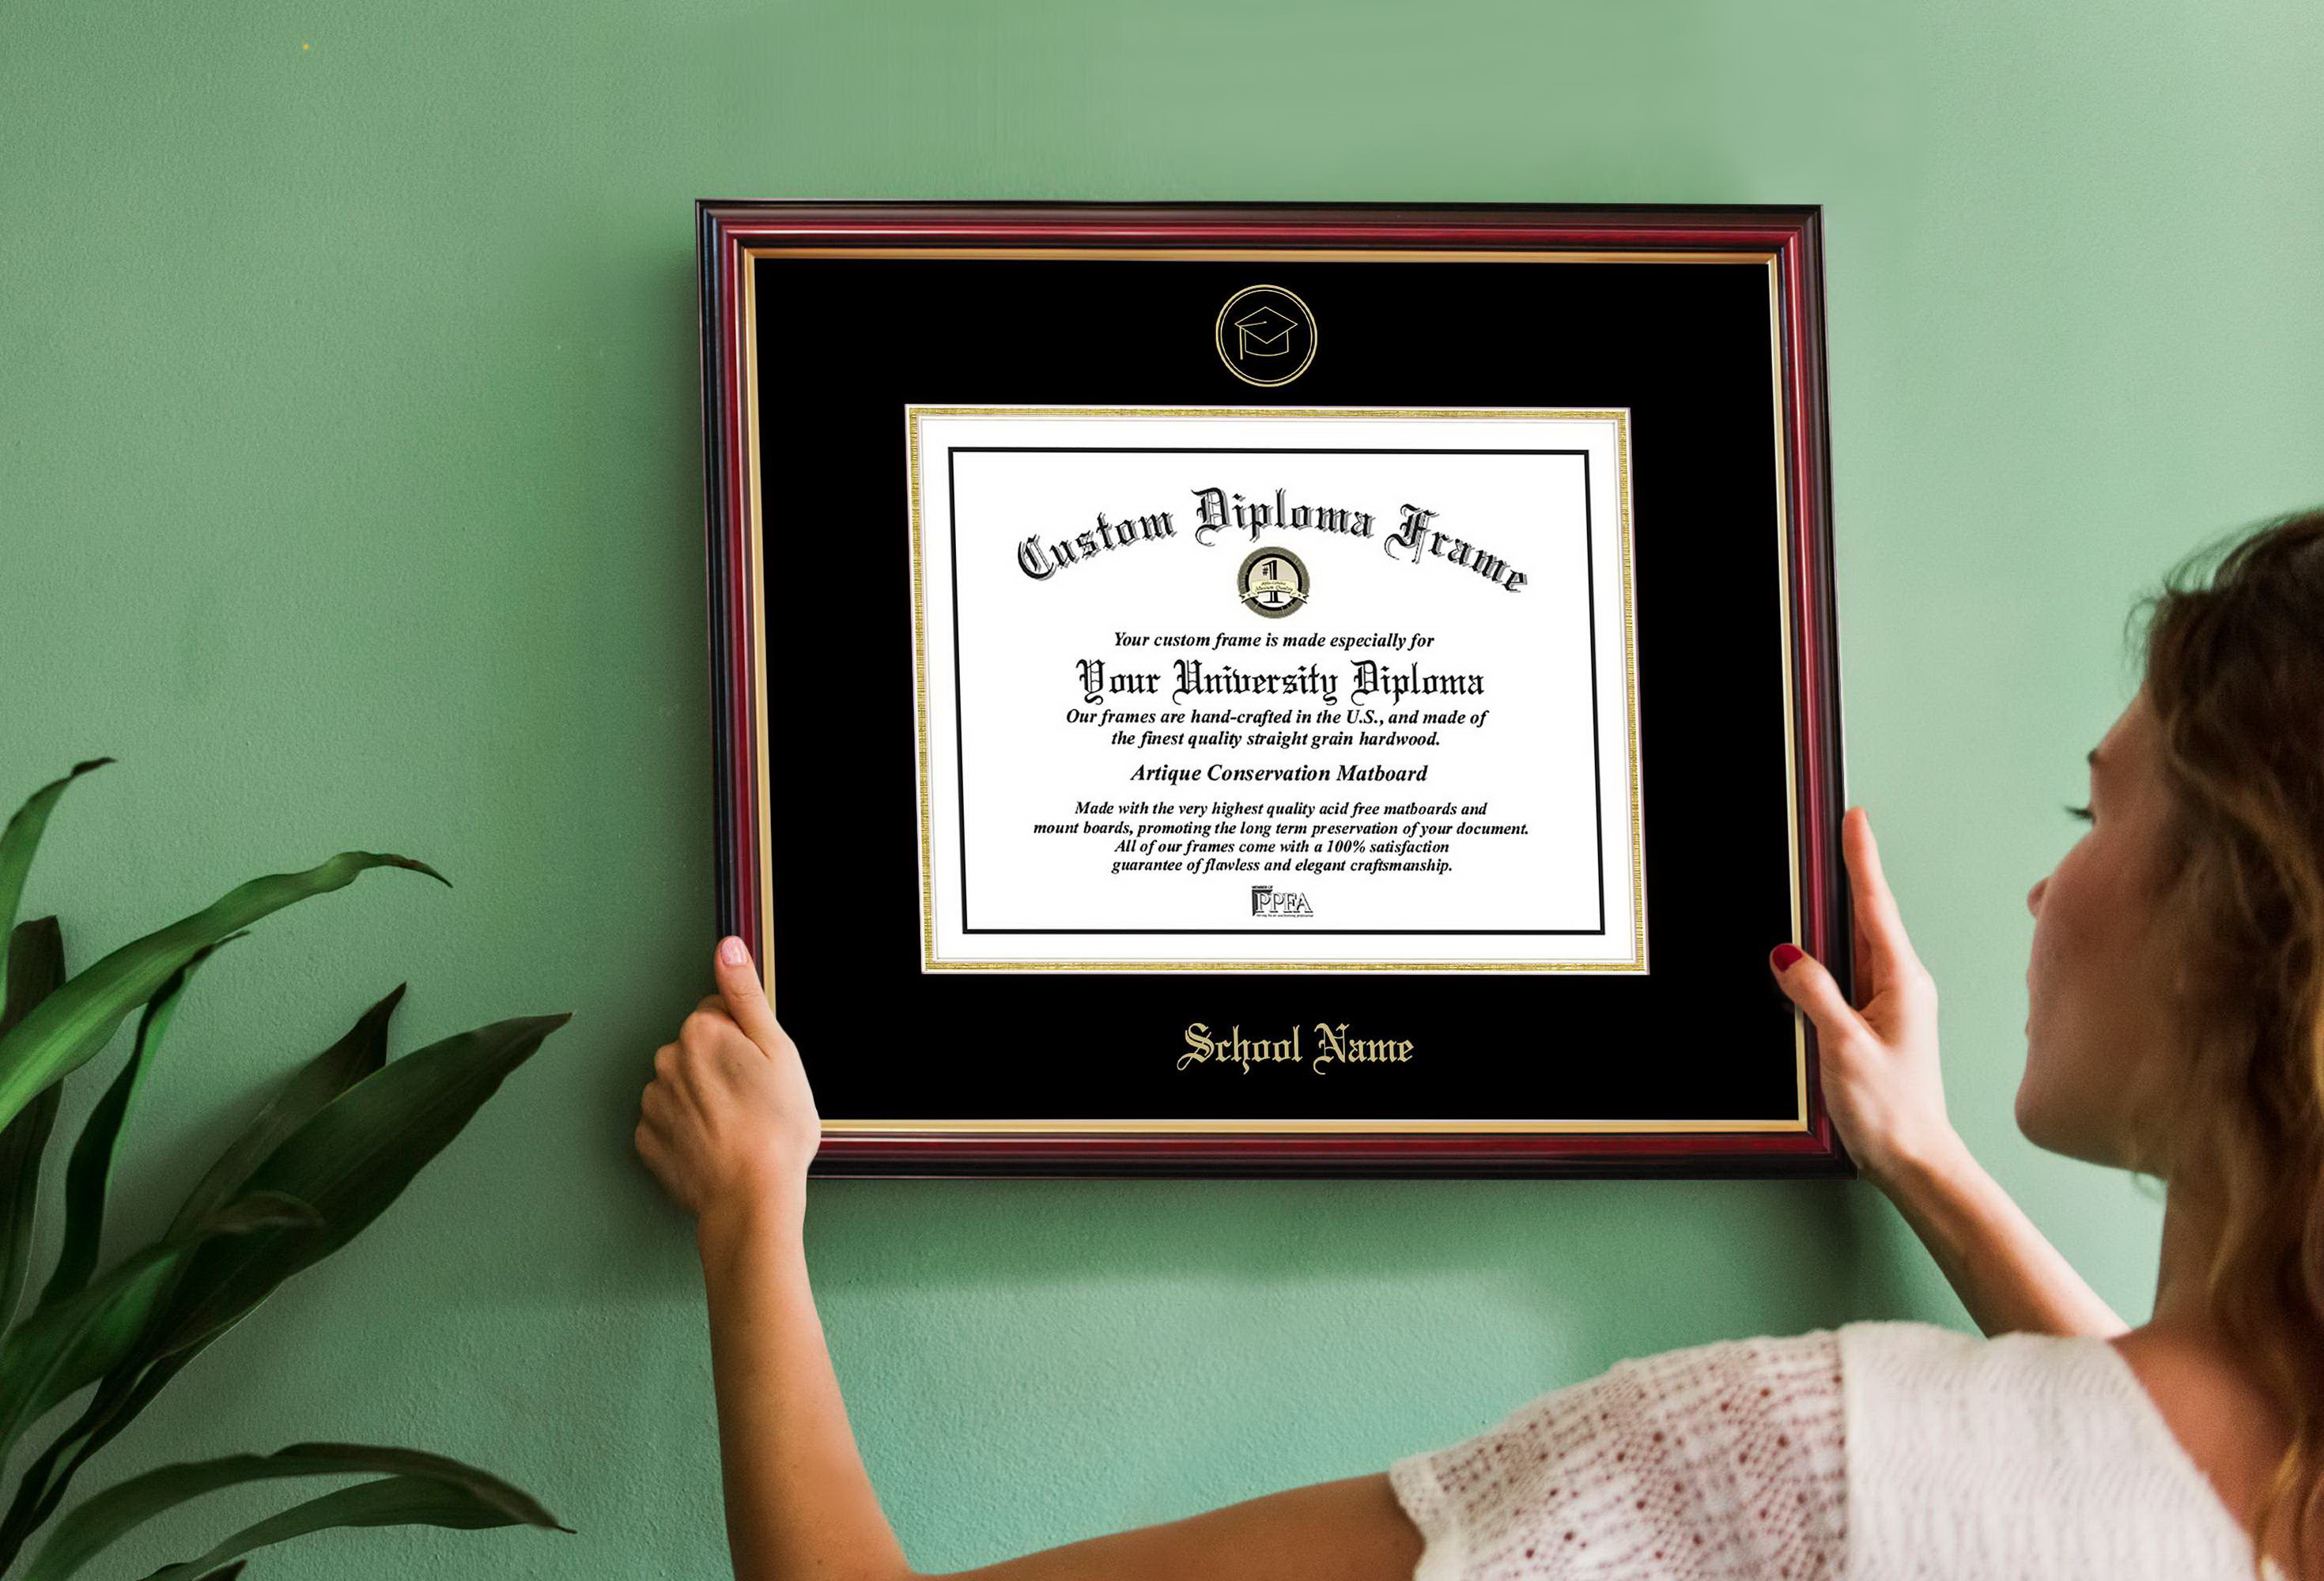 Campus Images KY997PMGED-1714 University of Louisville Petite Diploma Frame